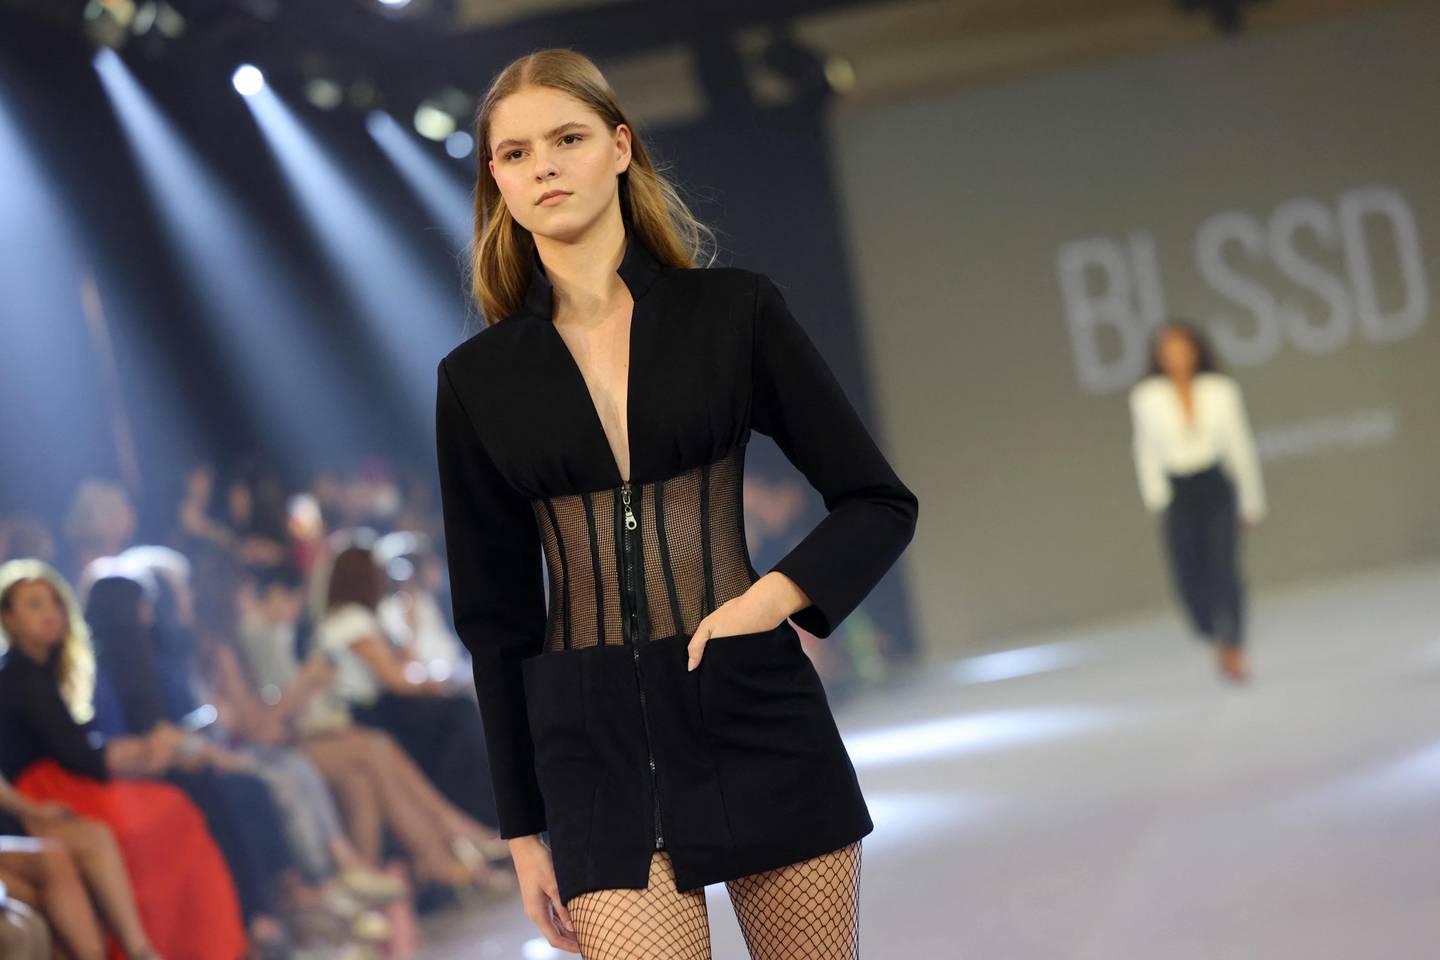 BLSSD delivers a partially sheer jacket for Arab Fashion Week. AFP